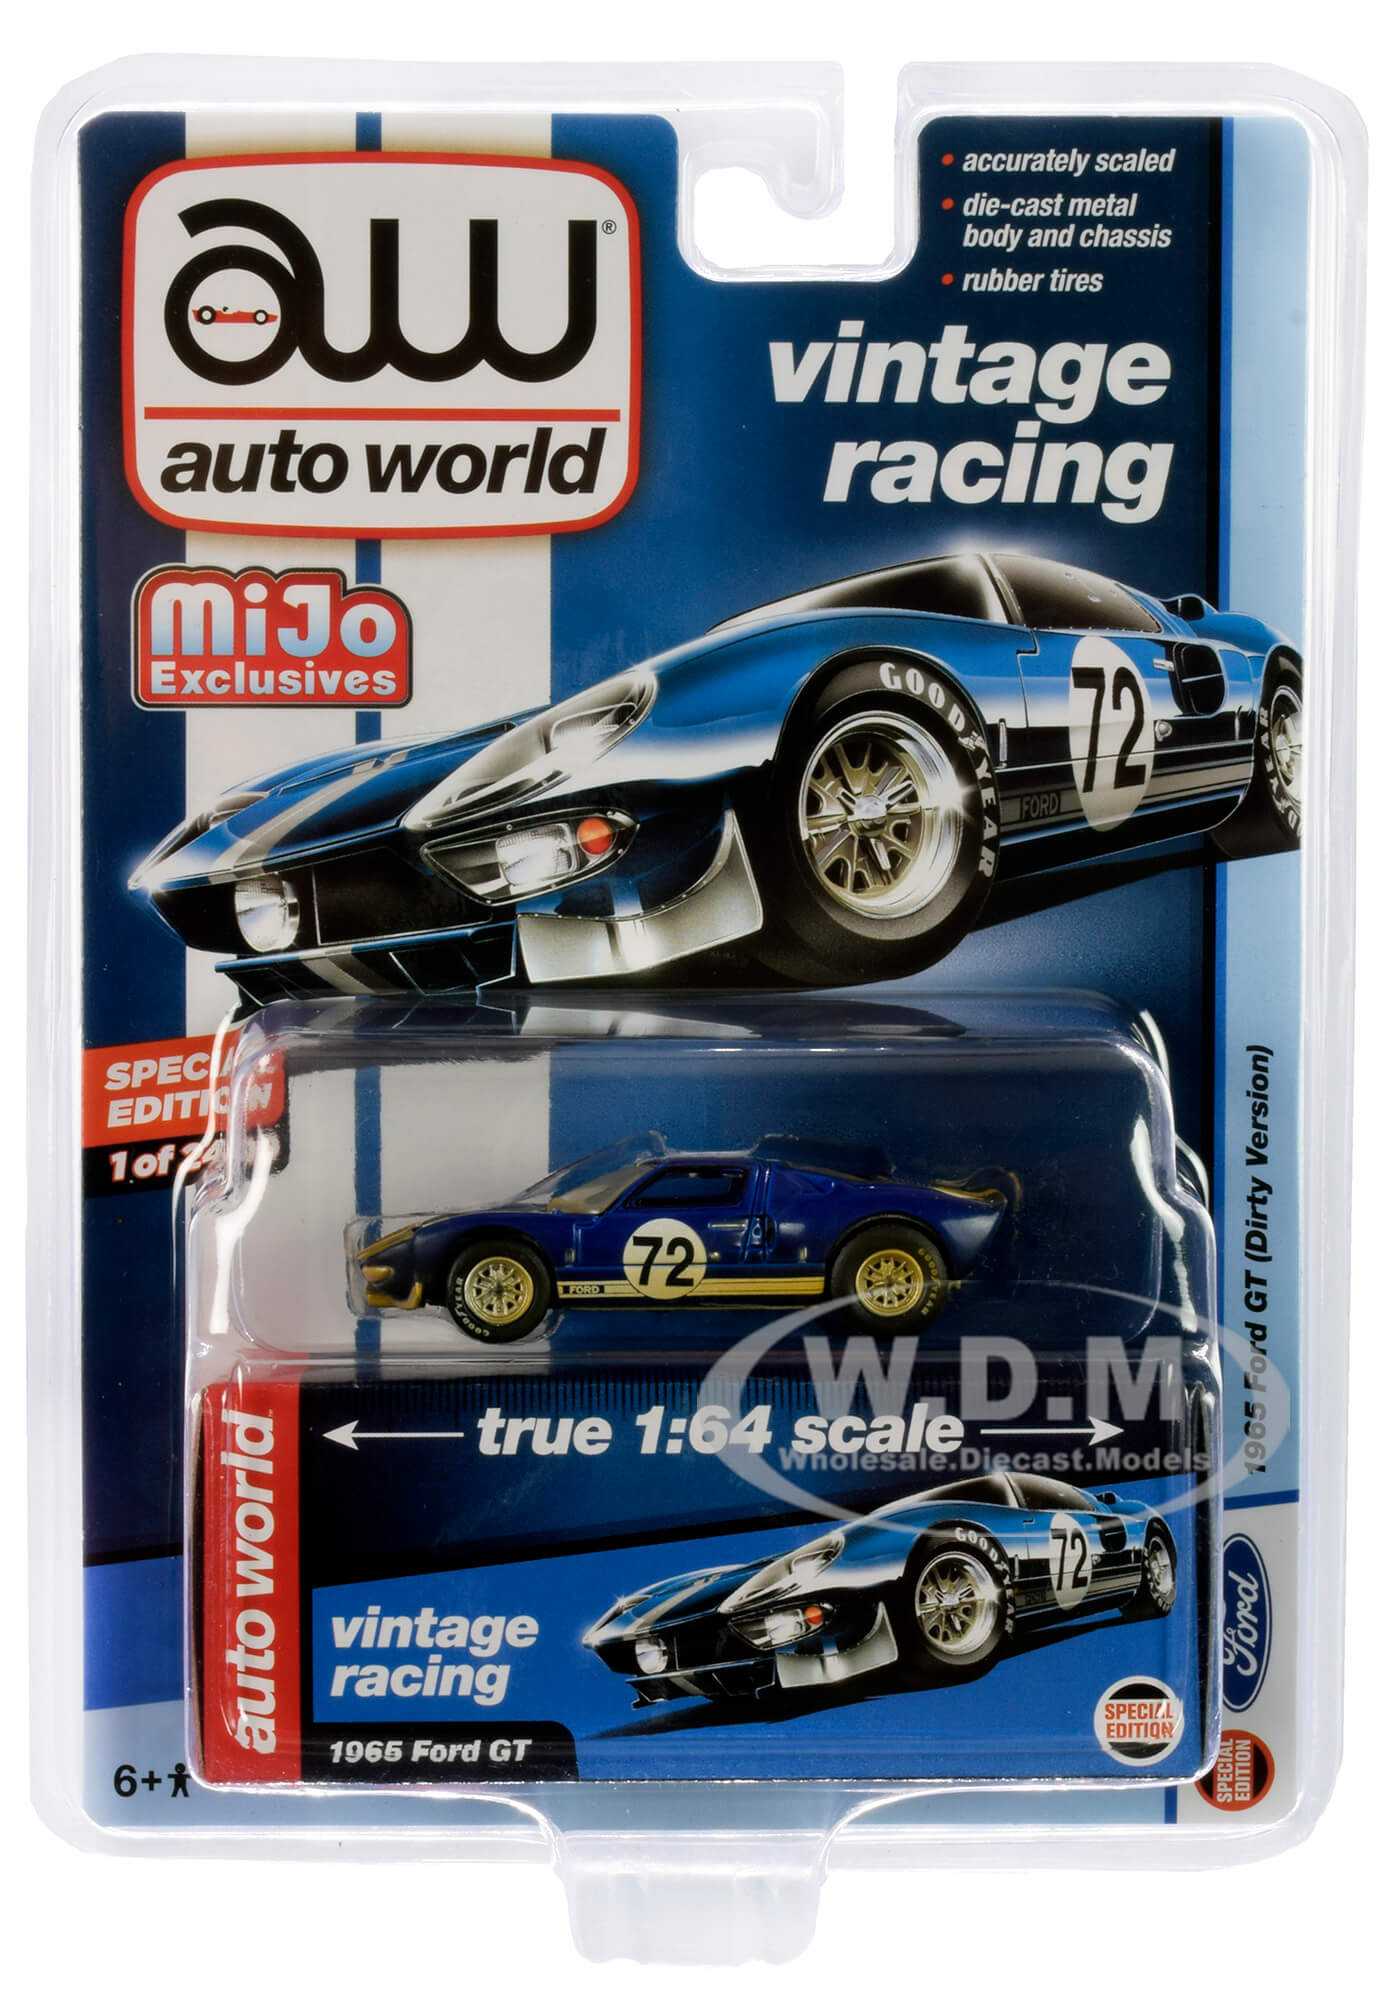 1965 Ford Gt 72 Dark Blue Metallic With White Stripes (dirty Version) "vintage Racing" Limited Edition To 2400 Pieces Worldwide 1/64 Diecast Model Ca